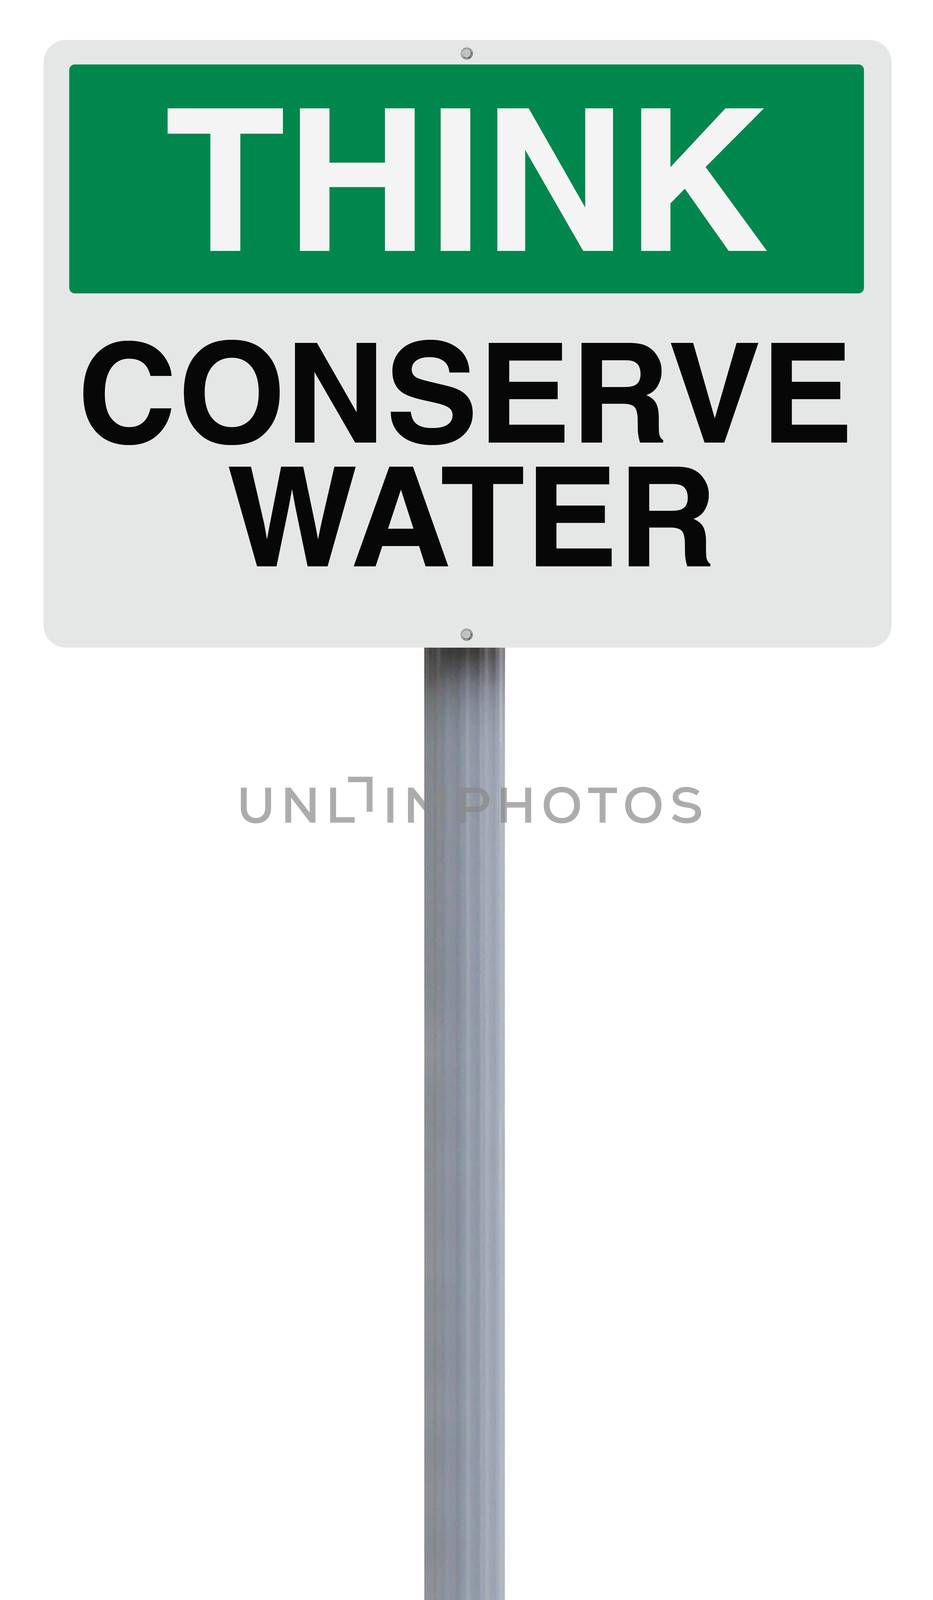 Conserve Water by rnl